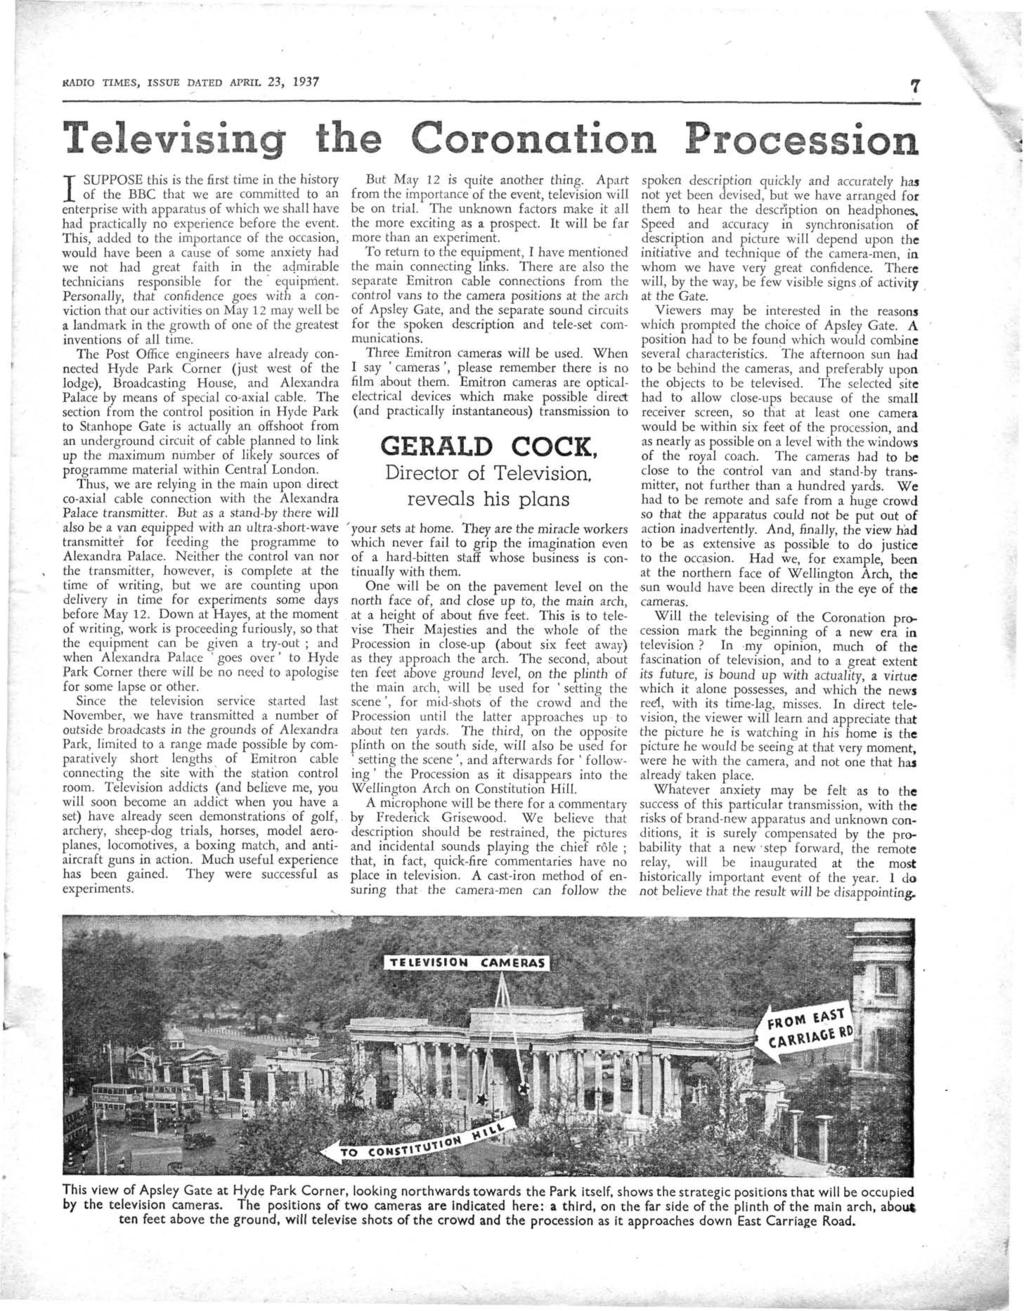 RADIO TIMES, ISSUE DATED APRIL 23, 1937 Televiing the Coronation Proceion I SUPPOSE thi i the firt time in the hitory of the BBC that we are committed to an enterprie with apparatu of which we hall